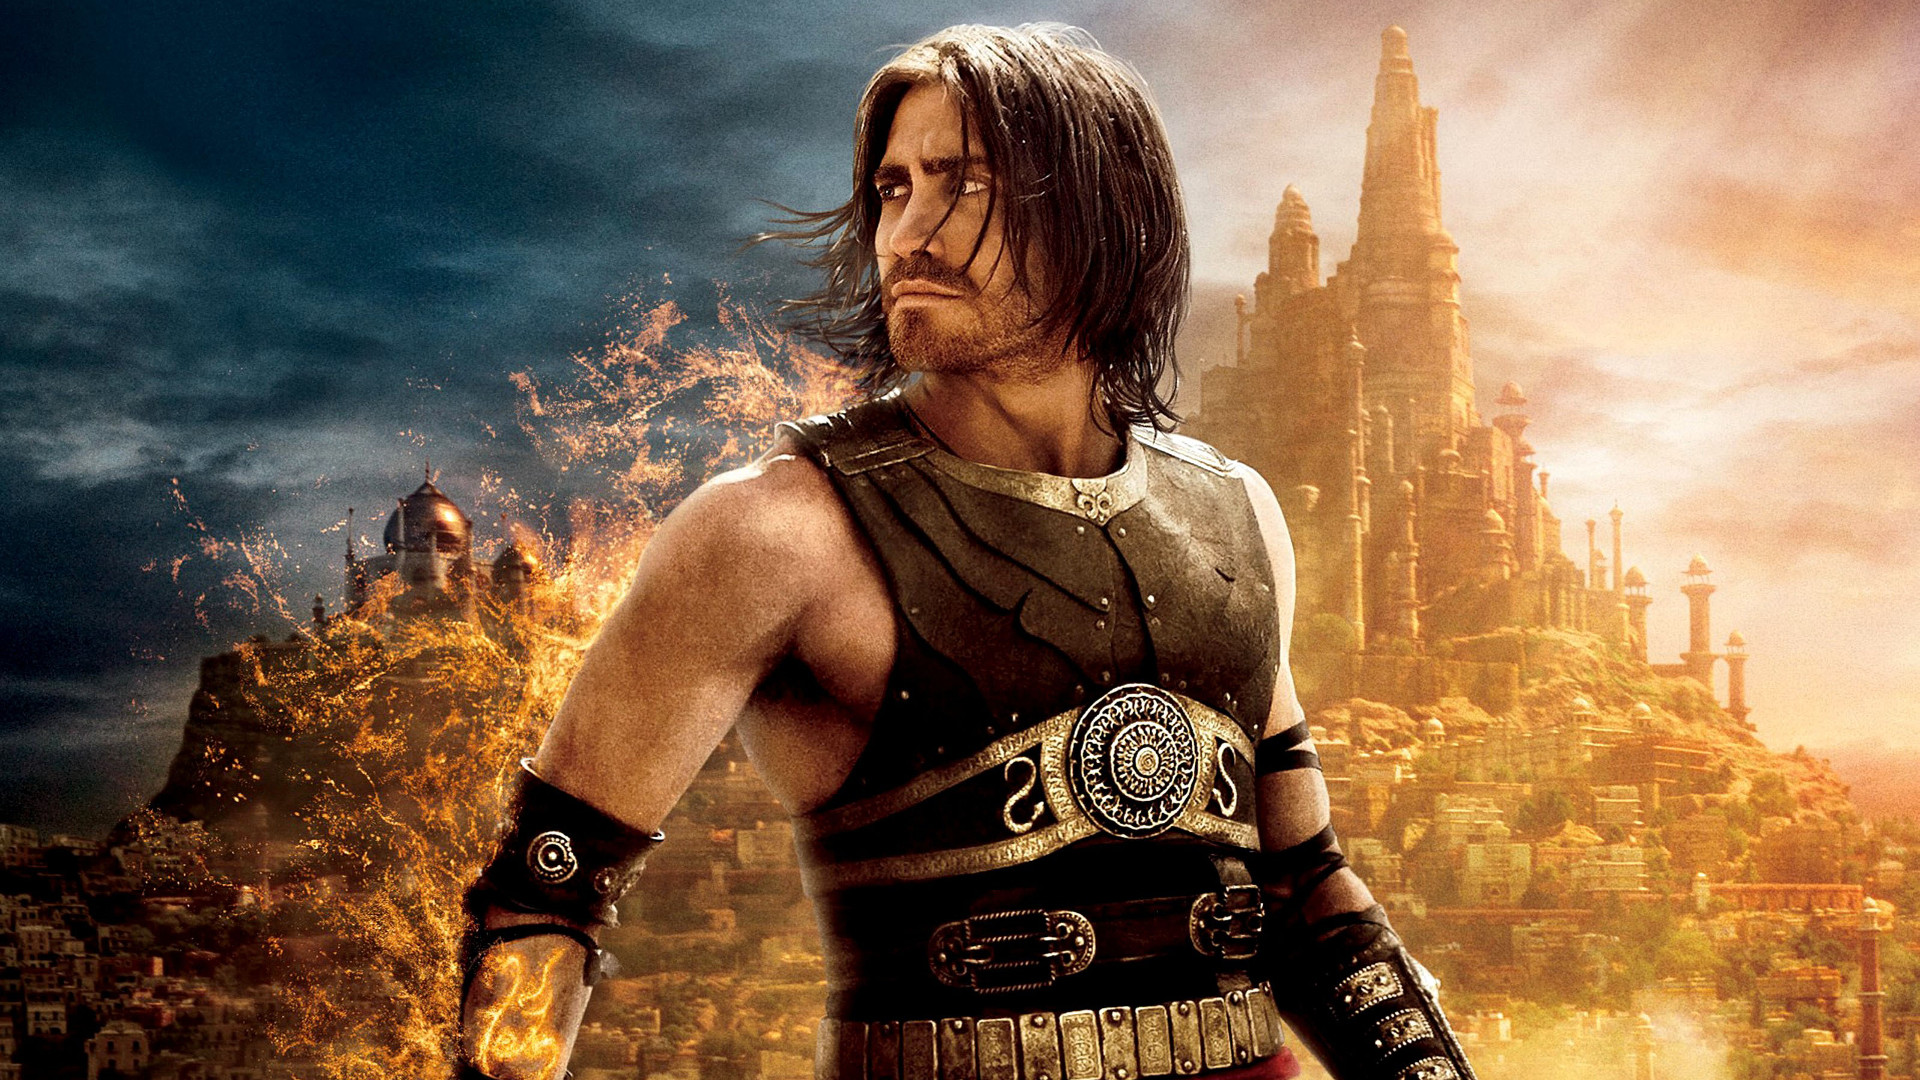 Movie Prince of Persia: The Sands of Time HD Wallpaper | Background Image